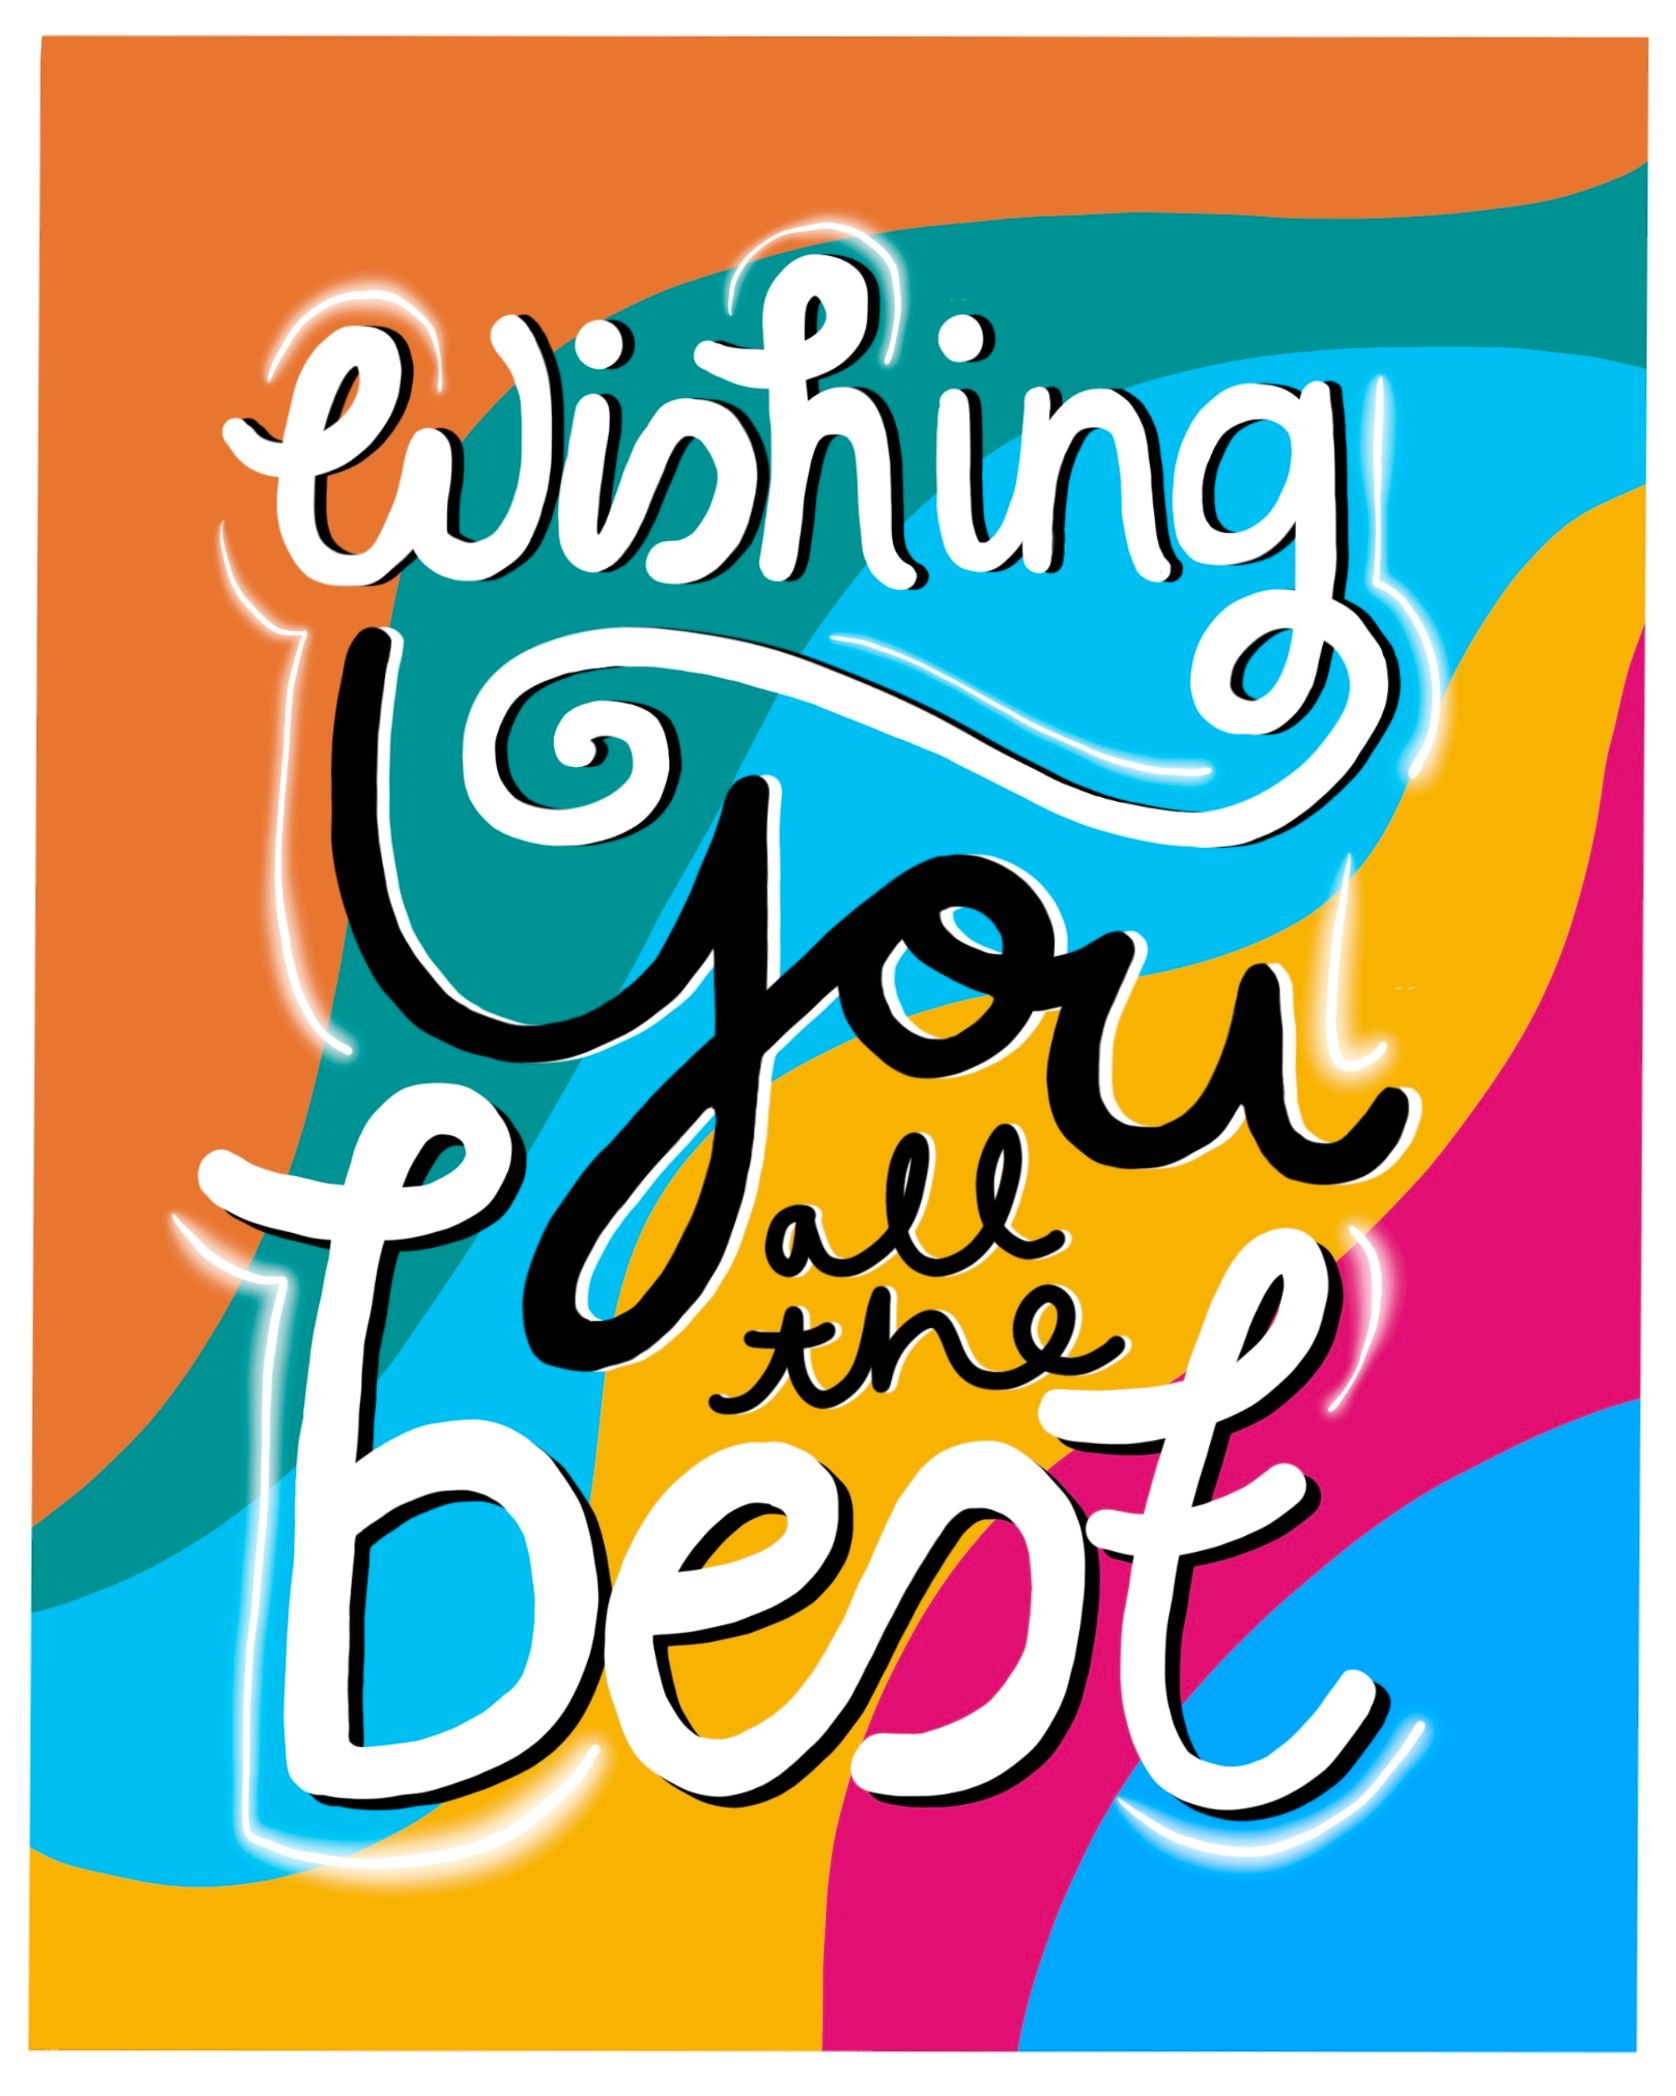 Card design "wishing you all the best"